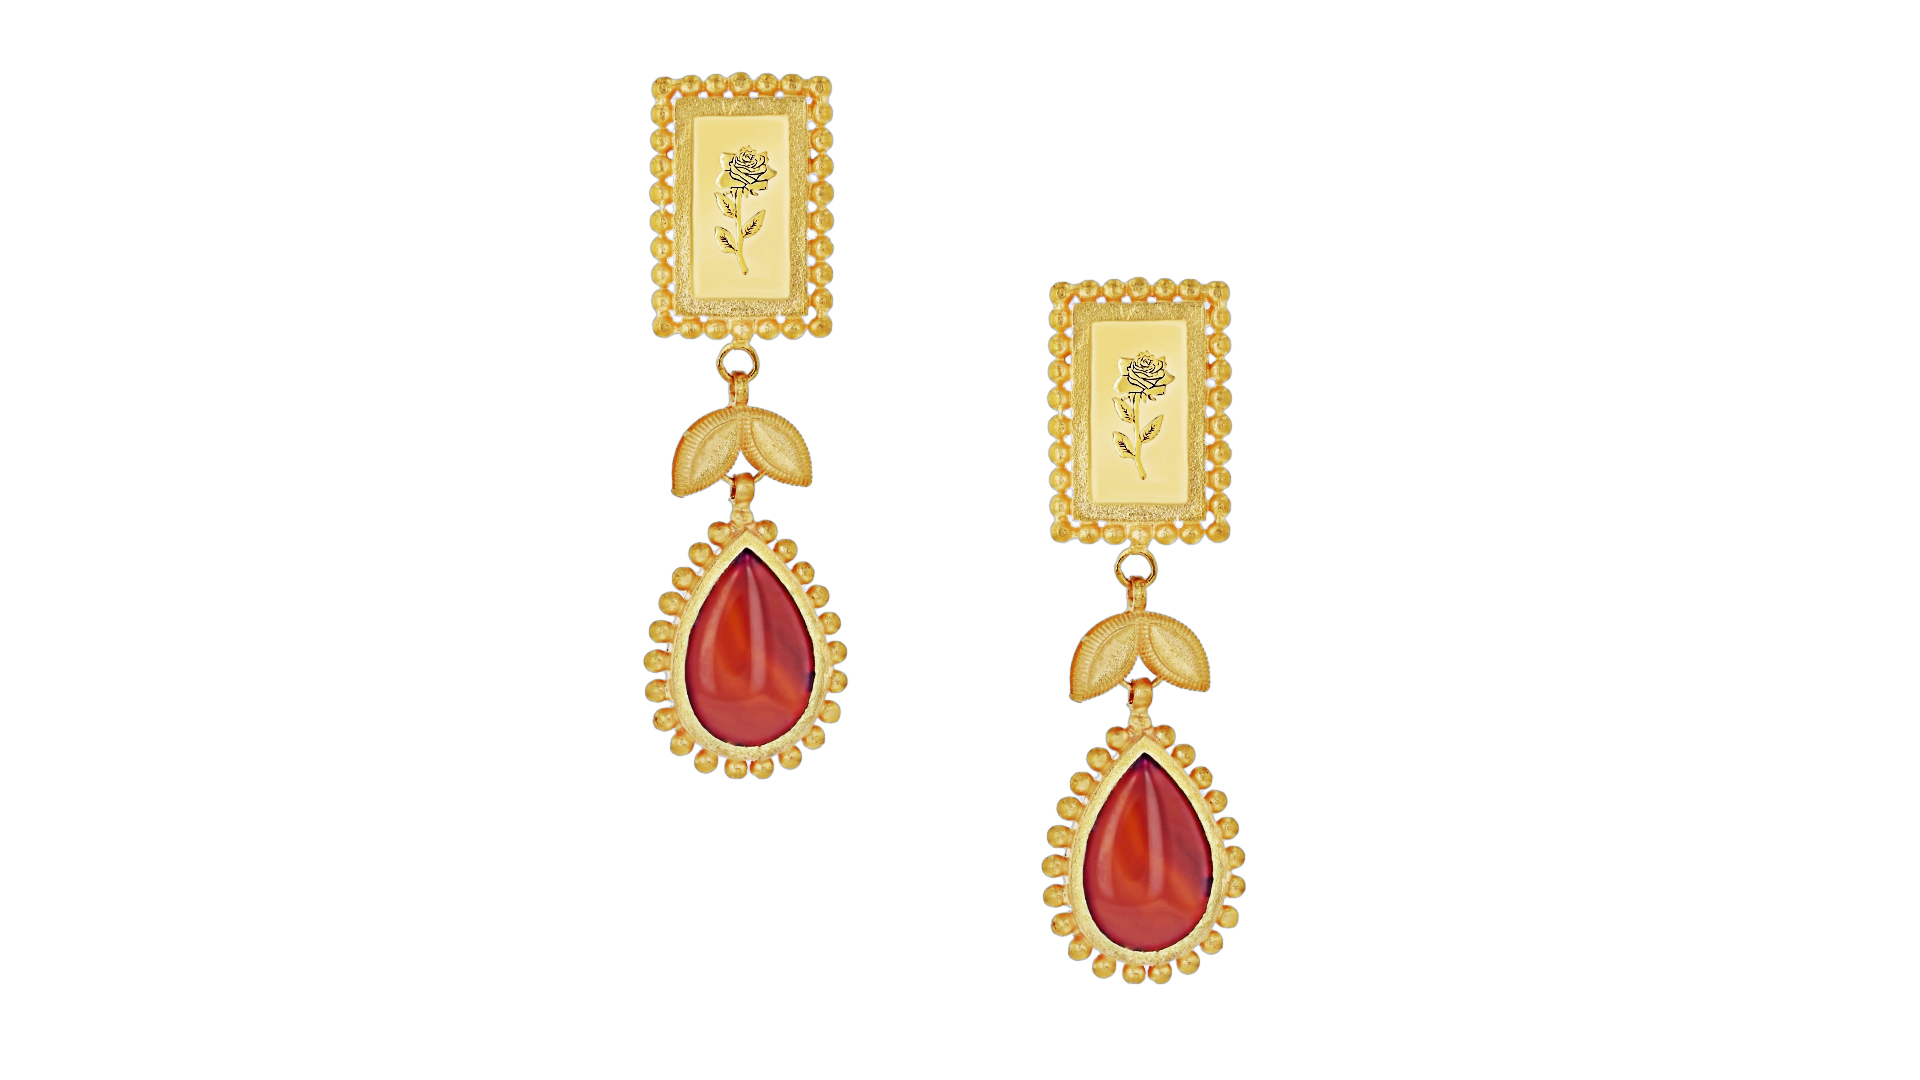 Agate Women's Jewellery - A Comprehensive Guide to Buying